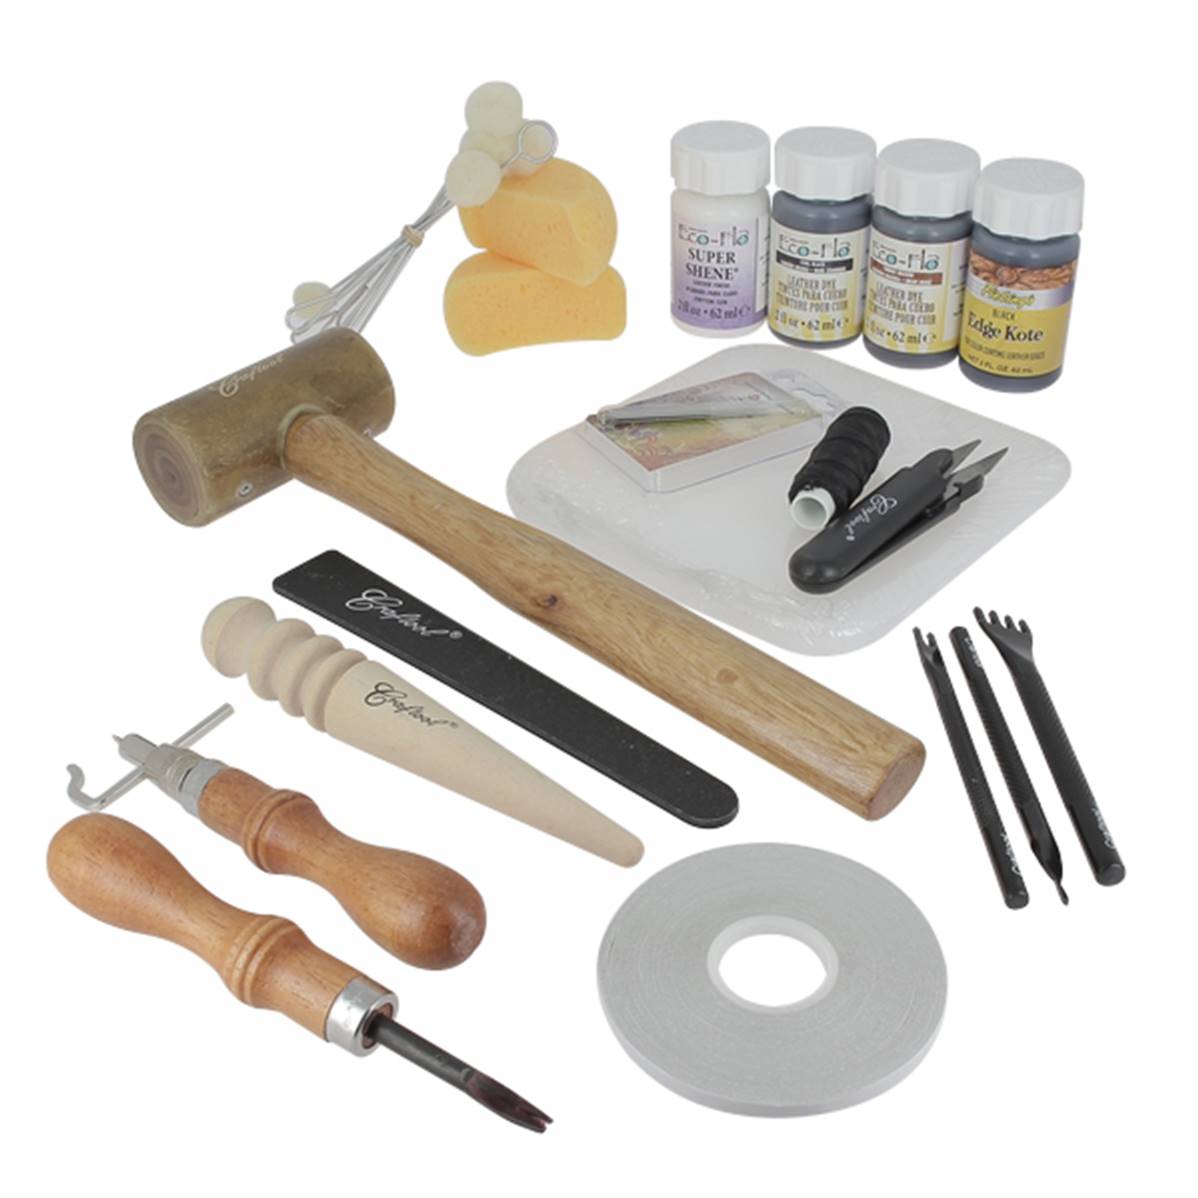 Kit complet "DELUXE LEATHERCRAFTING" - 55403